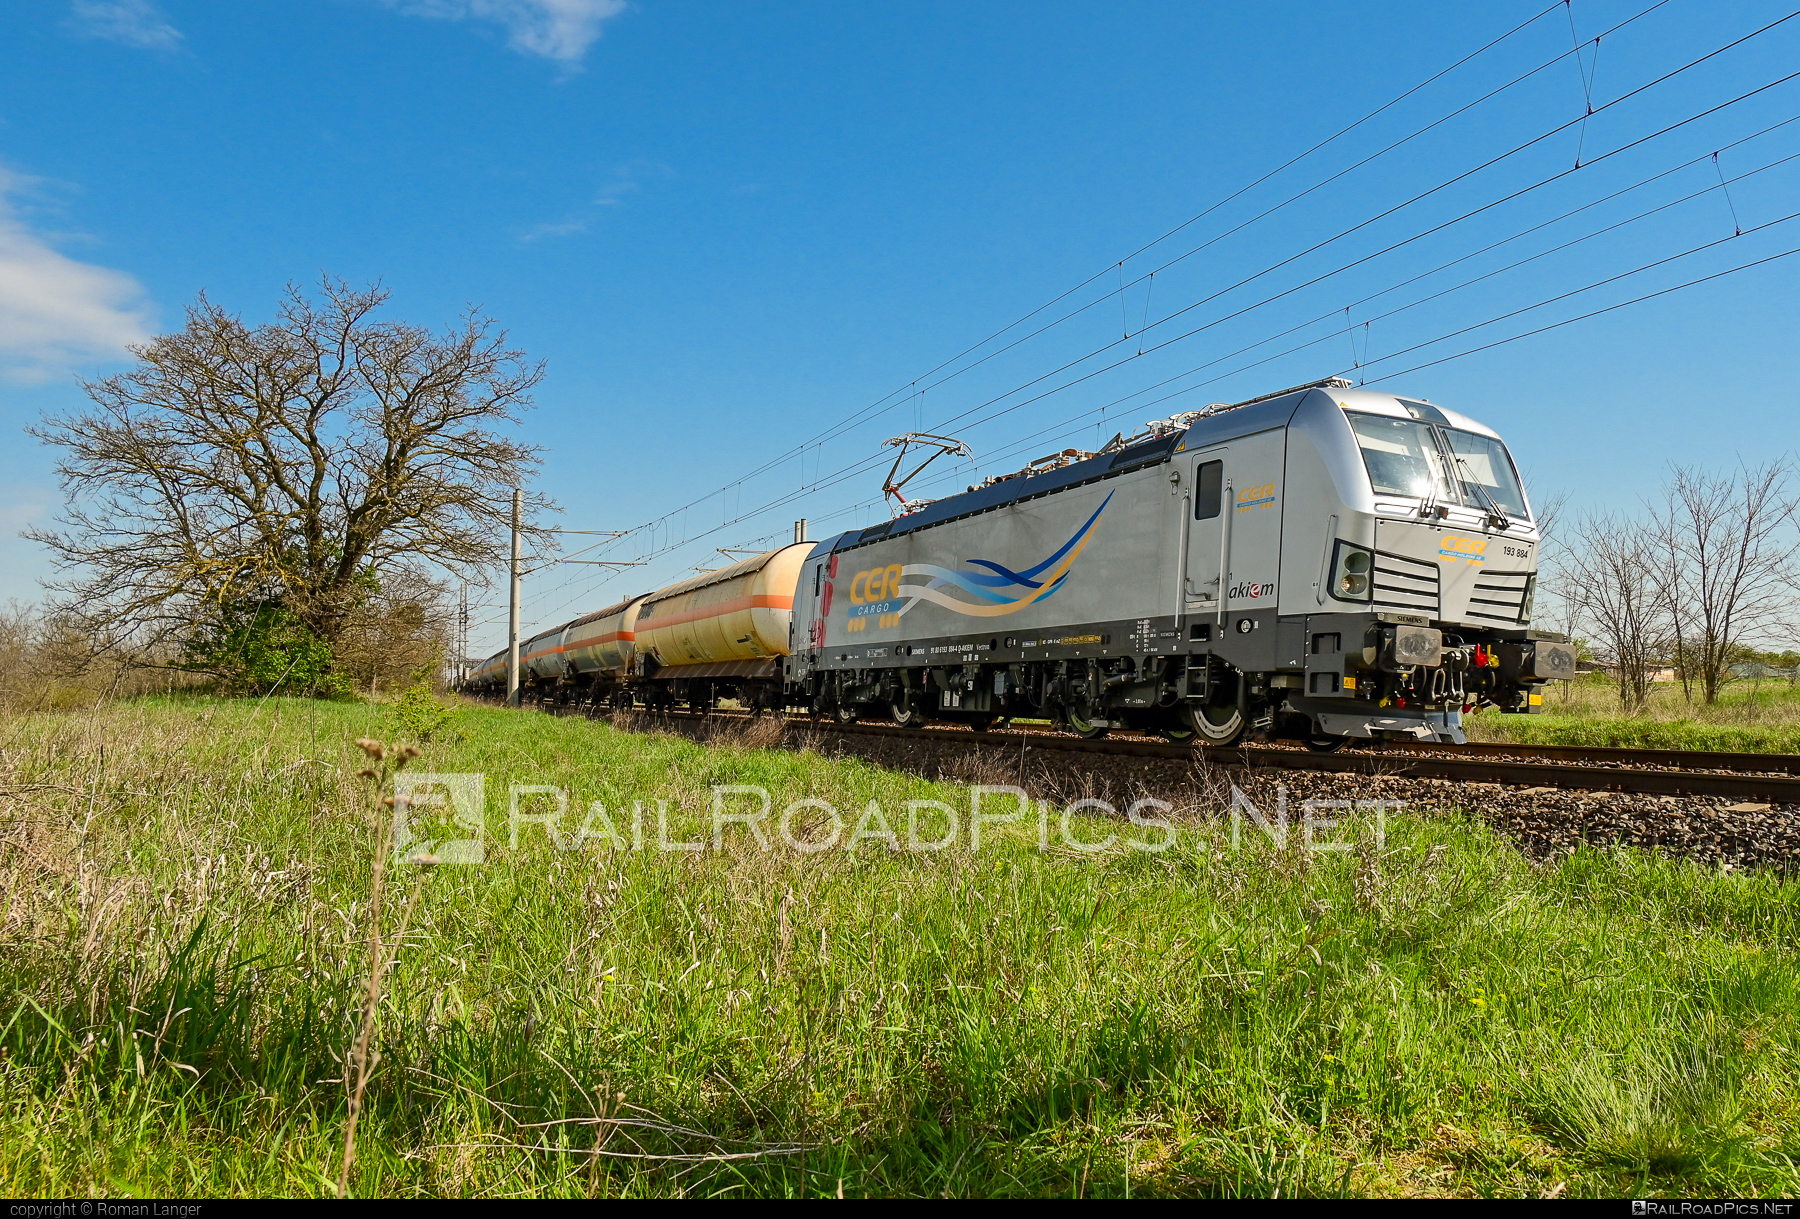 Siemens Vectron MS - 193 884 operated by CER Cargo Holding SE #akiem #akiemsas #cer #cercargoholding #cercargoholdingse #kesselwagen #siemens #siemensVectron #siemensVectronMS #tankwagon #vectron #vectronMS